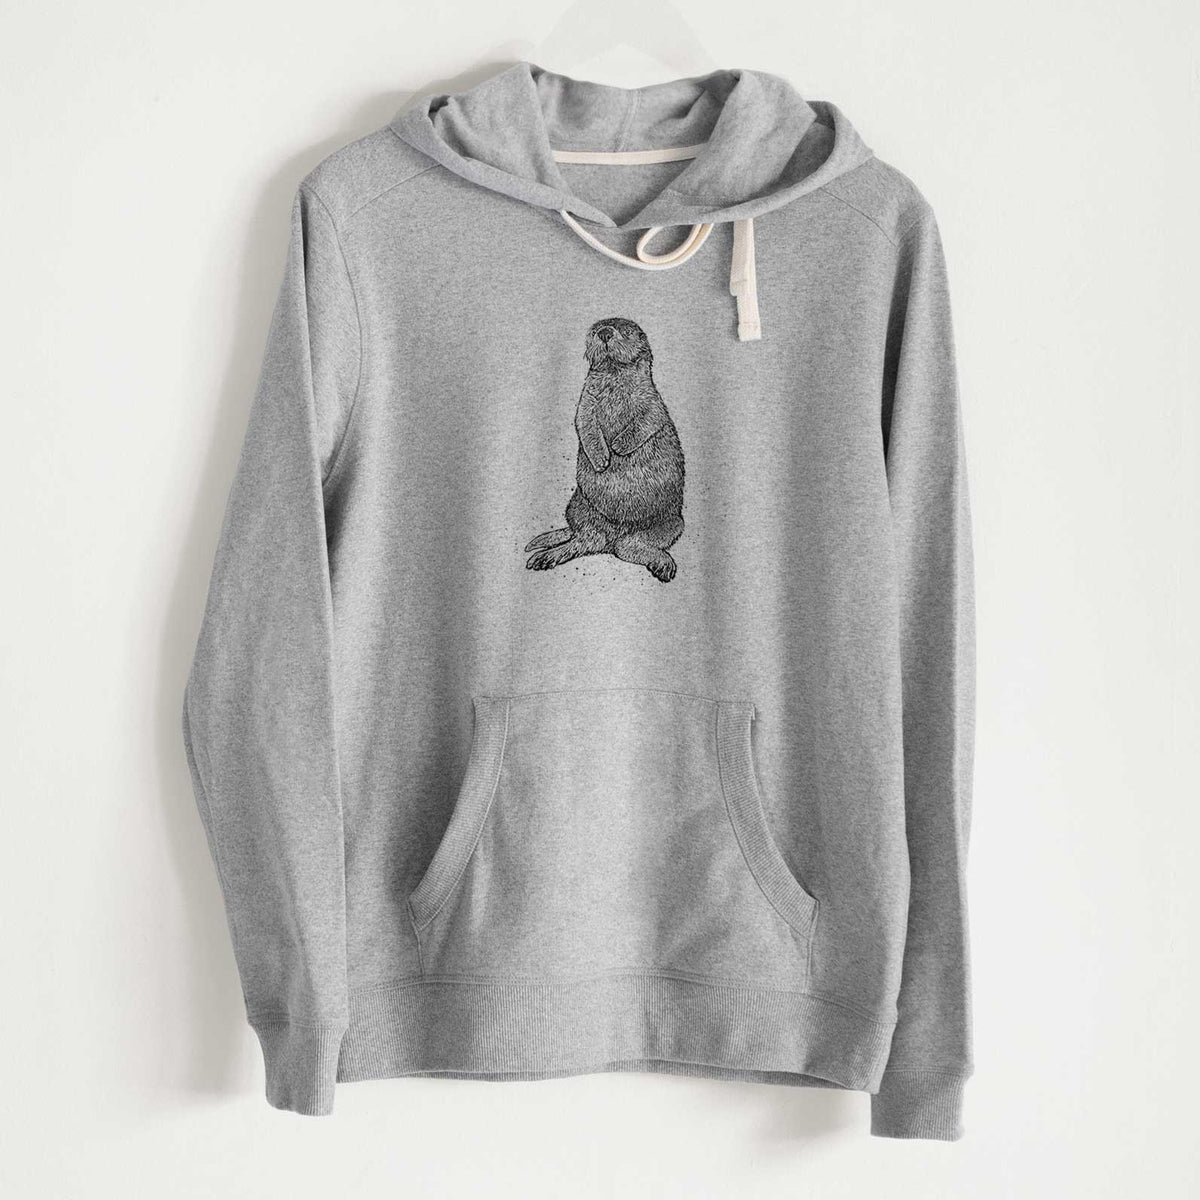 Enhydra lutris - California Sea Otter - Unisex Recycled Hoodie - CLOSEOUT - FINAL SALE